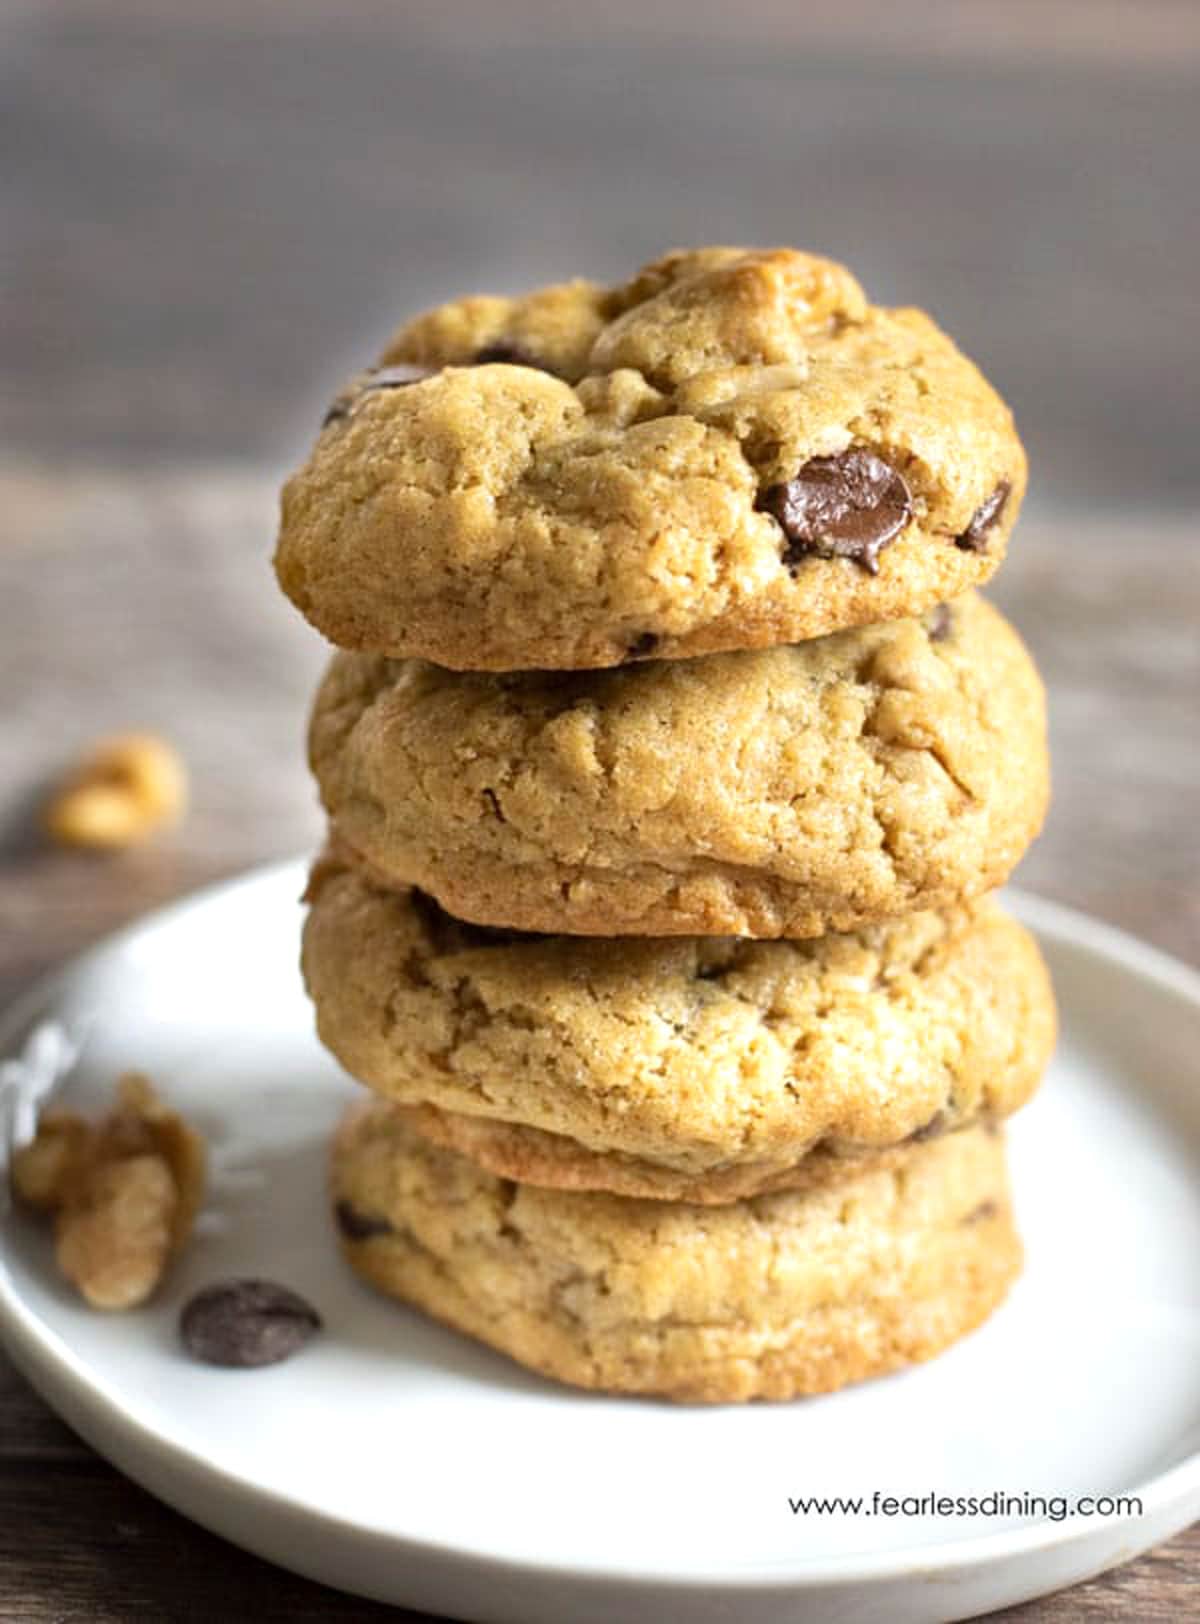 A stack of four chocolate chip cookies.